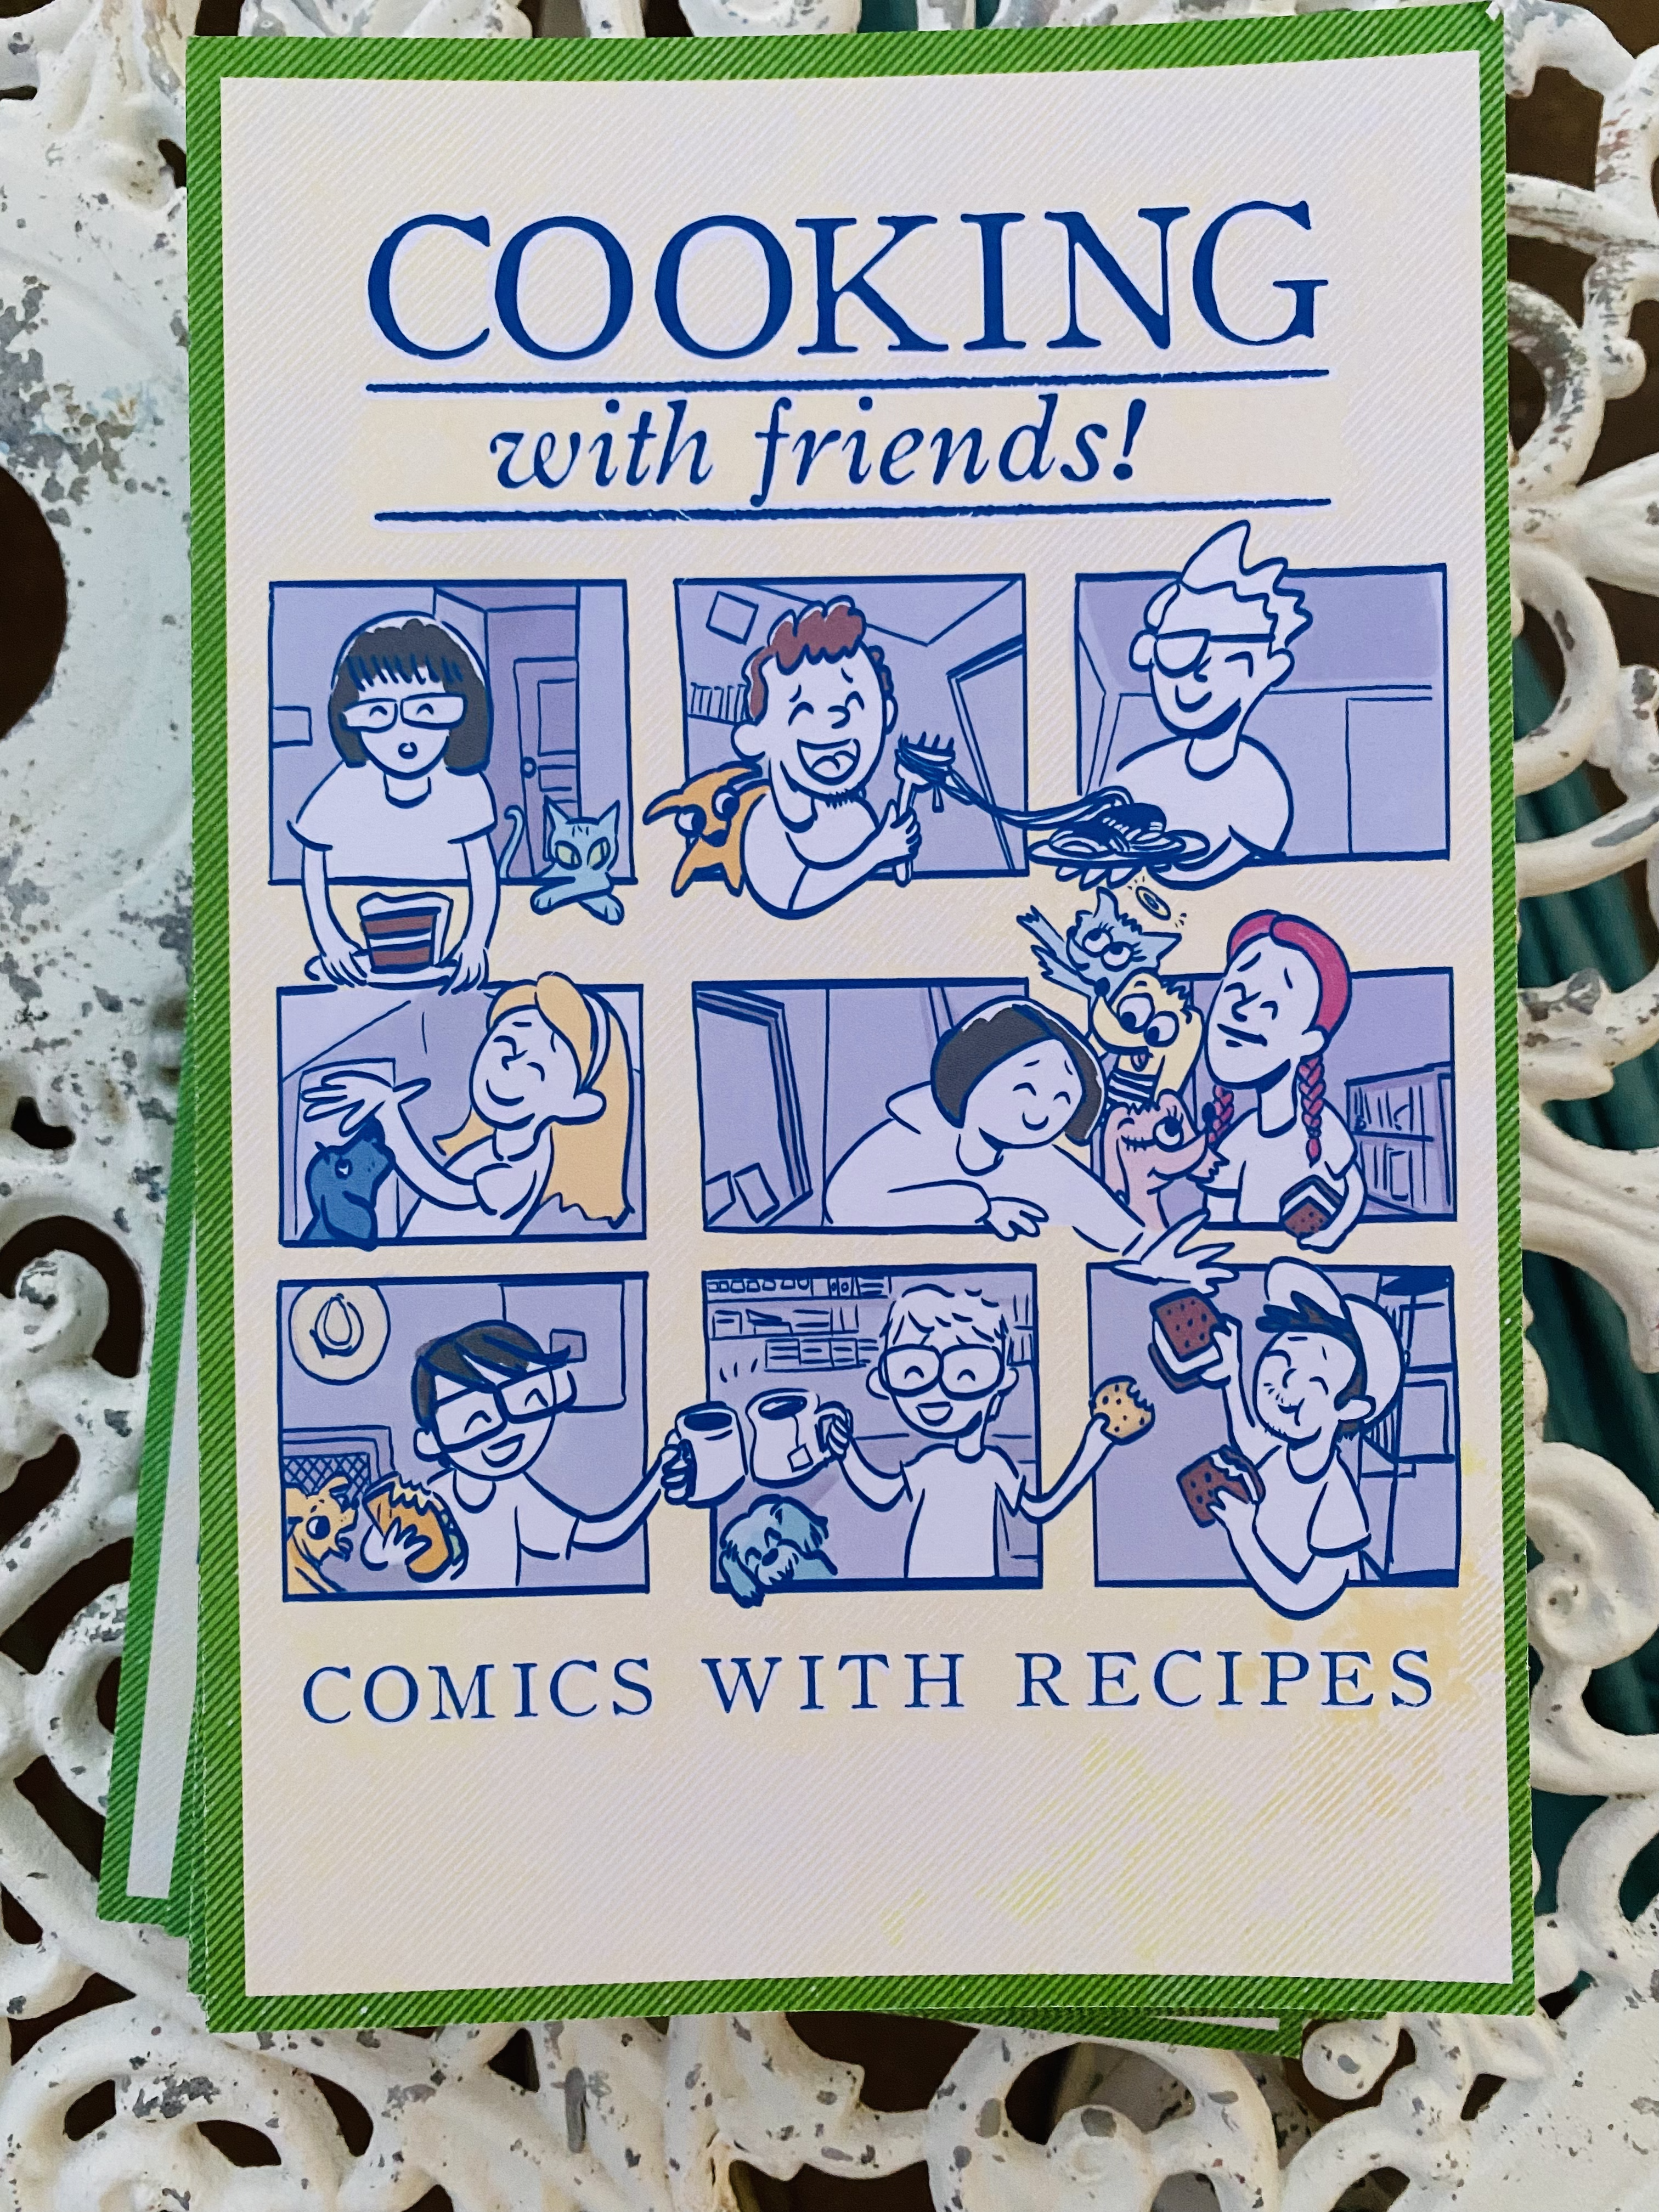 Cooking-with-Friends cover featuring images from each of the comics